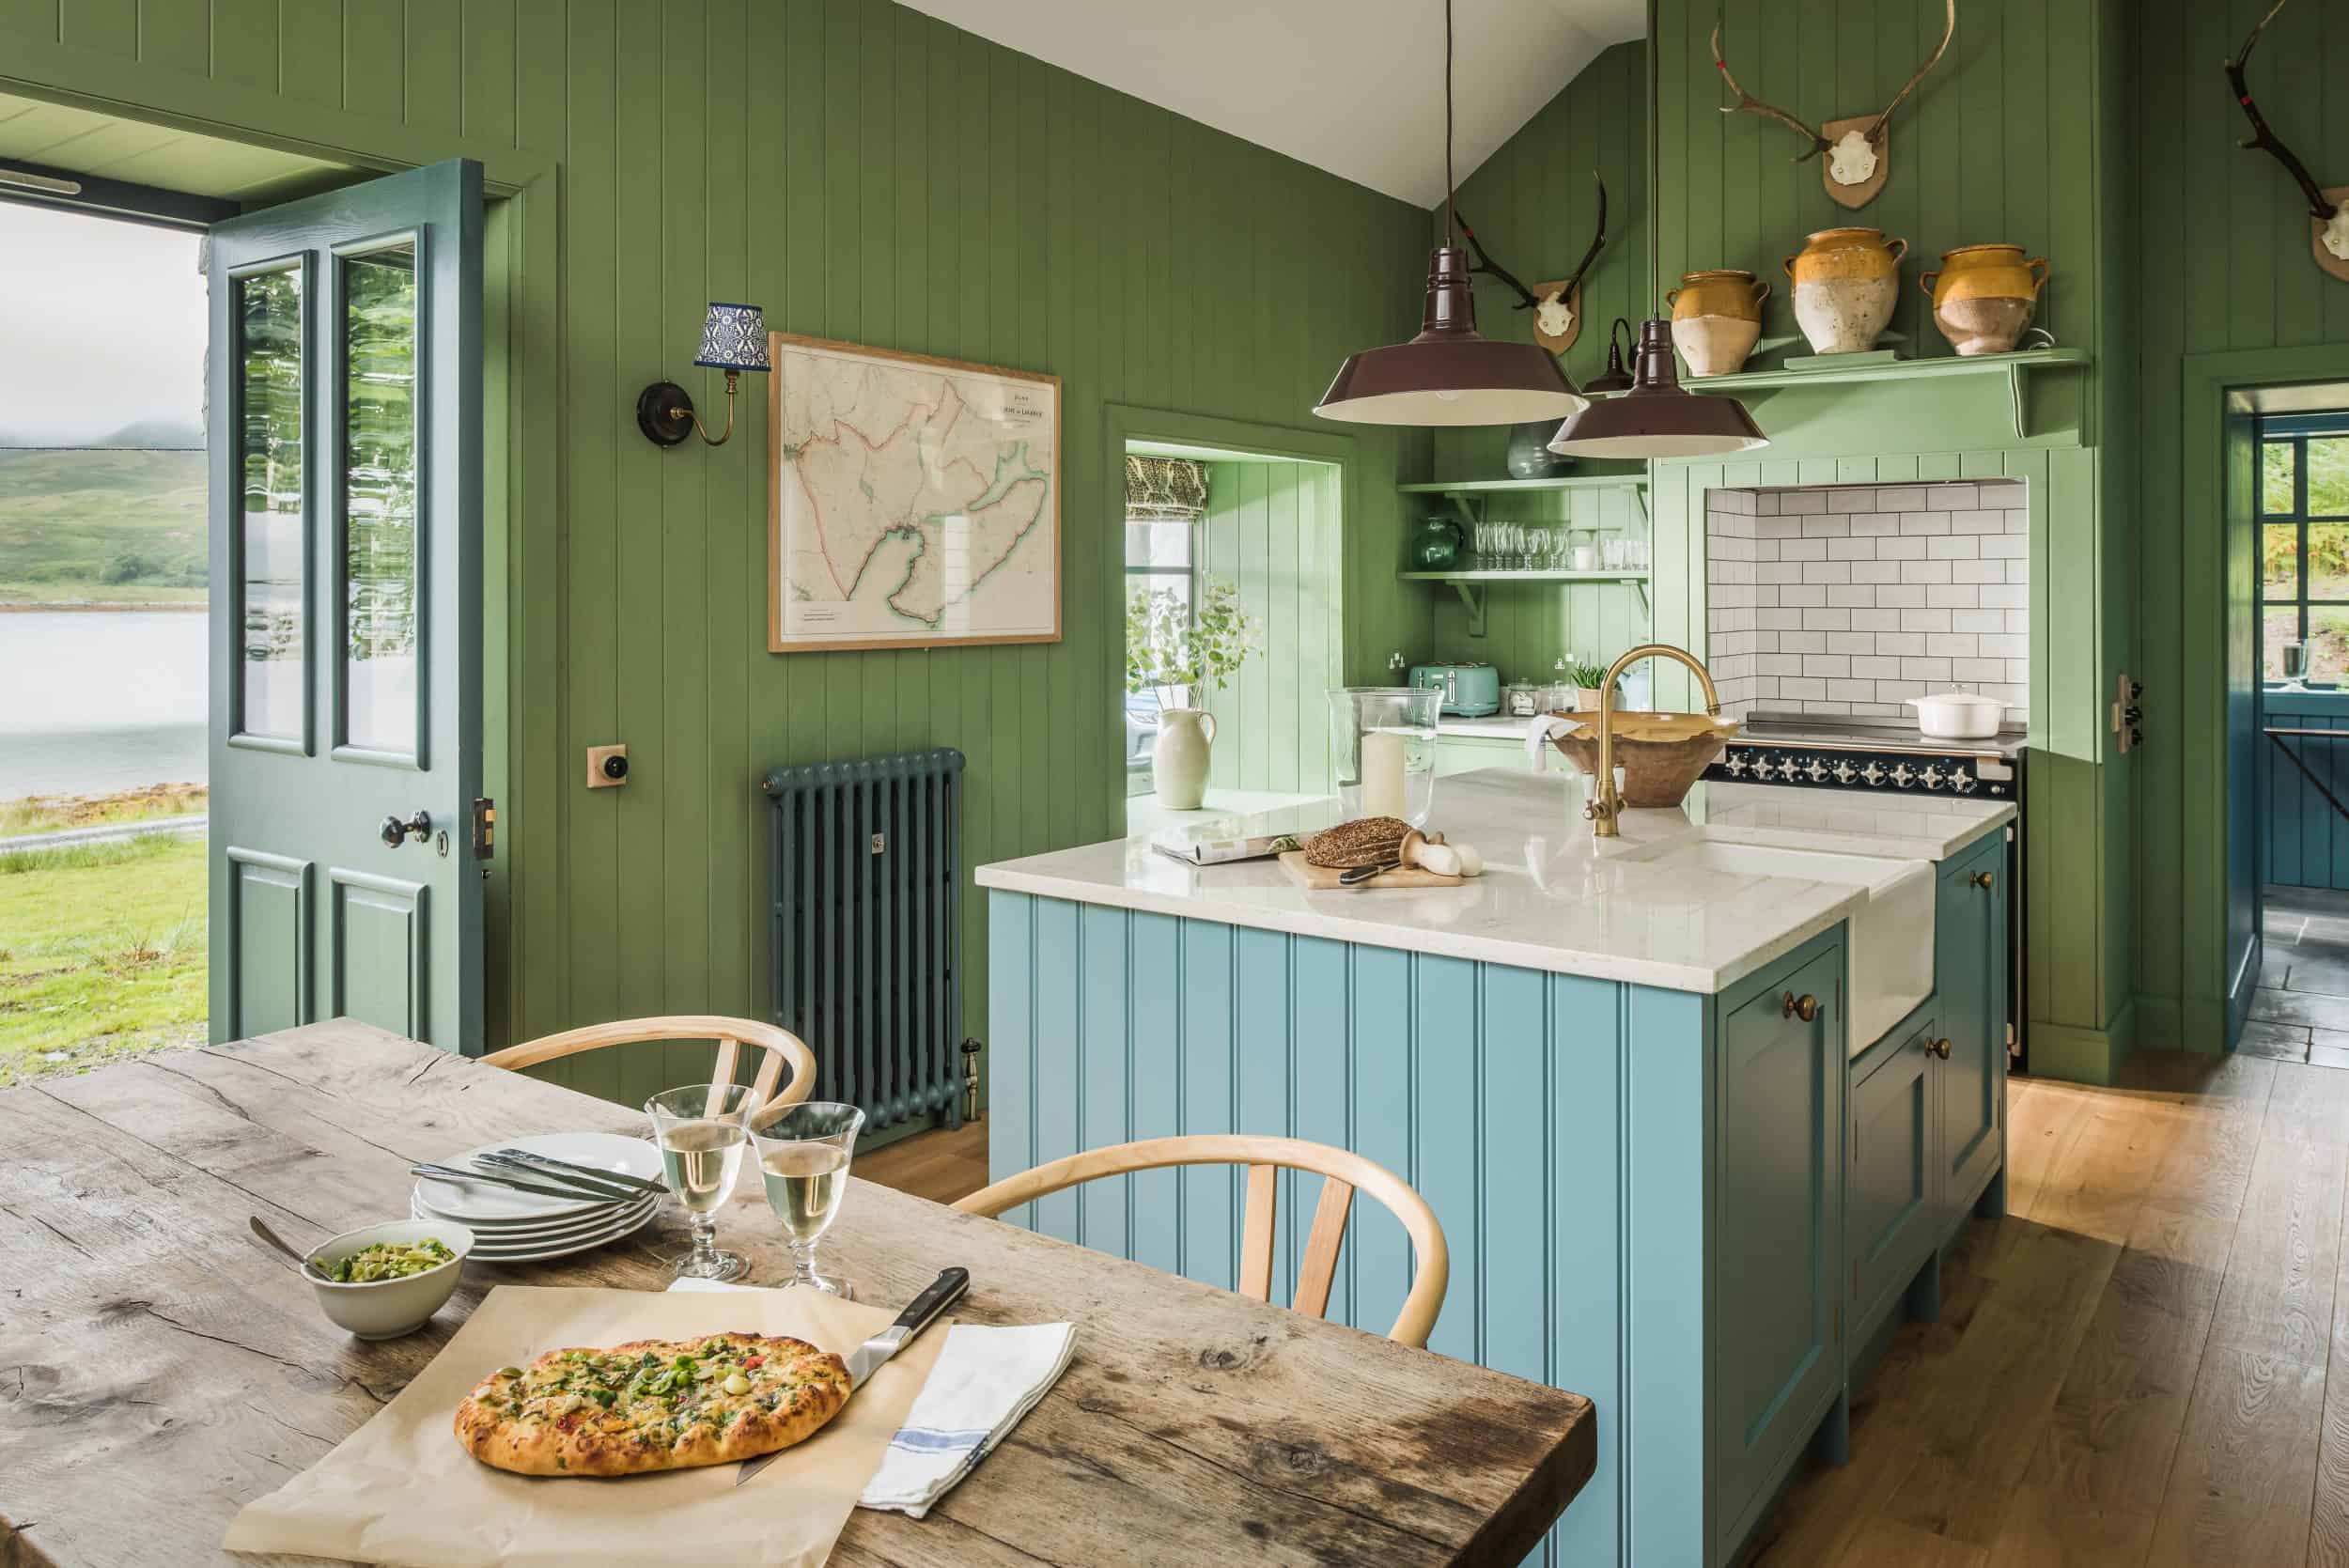 John Lewis of Hungerford luxury shaker style cottage kitchen with bright green wooden panel walls and turquoise blue kitchen island with white worktop and a rustic wooden dining table